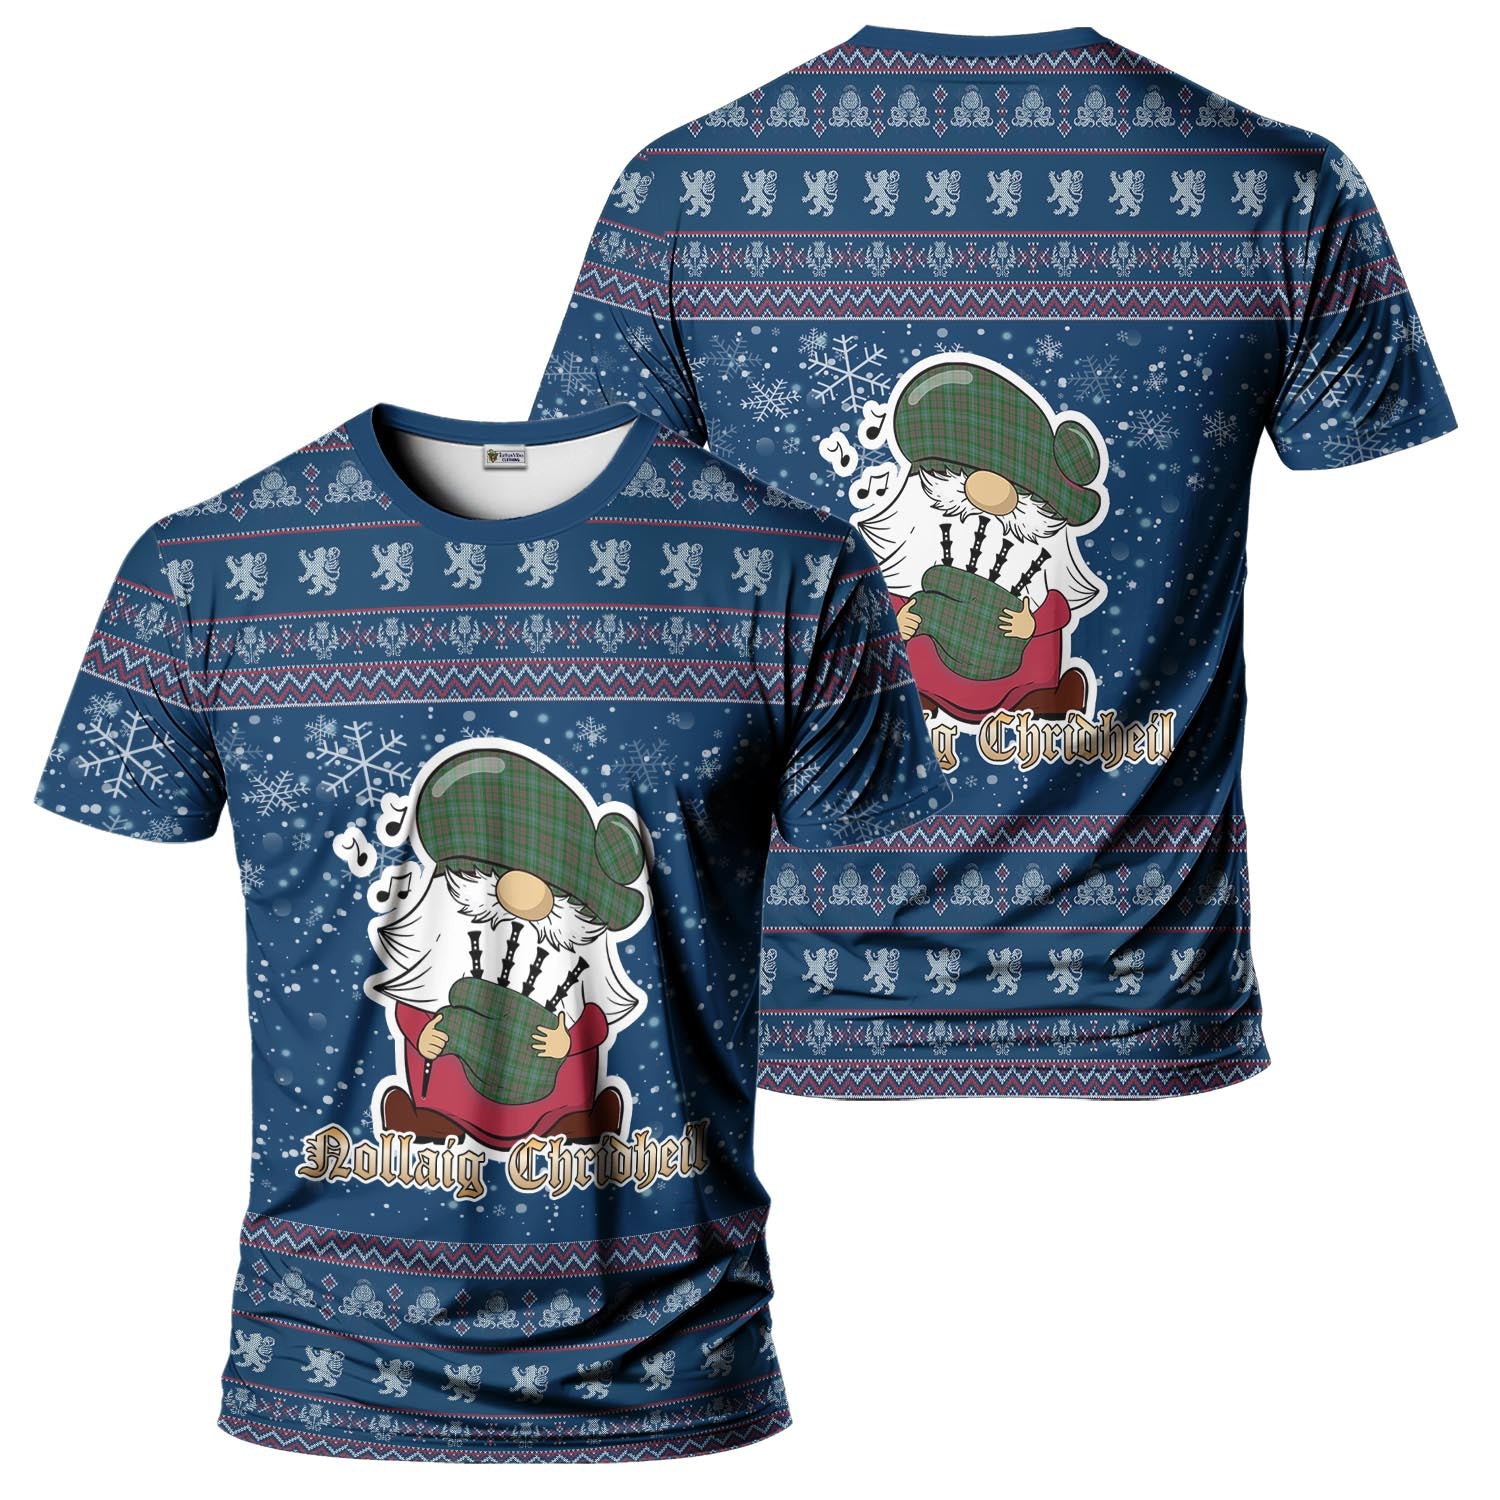 Ralston USA Clan Christmas Family T-Shirt with Funny Gnome Playing Bagpipes Kid's Shirt Blue - Tartanvibesclothing